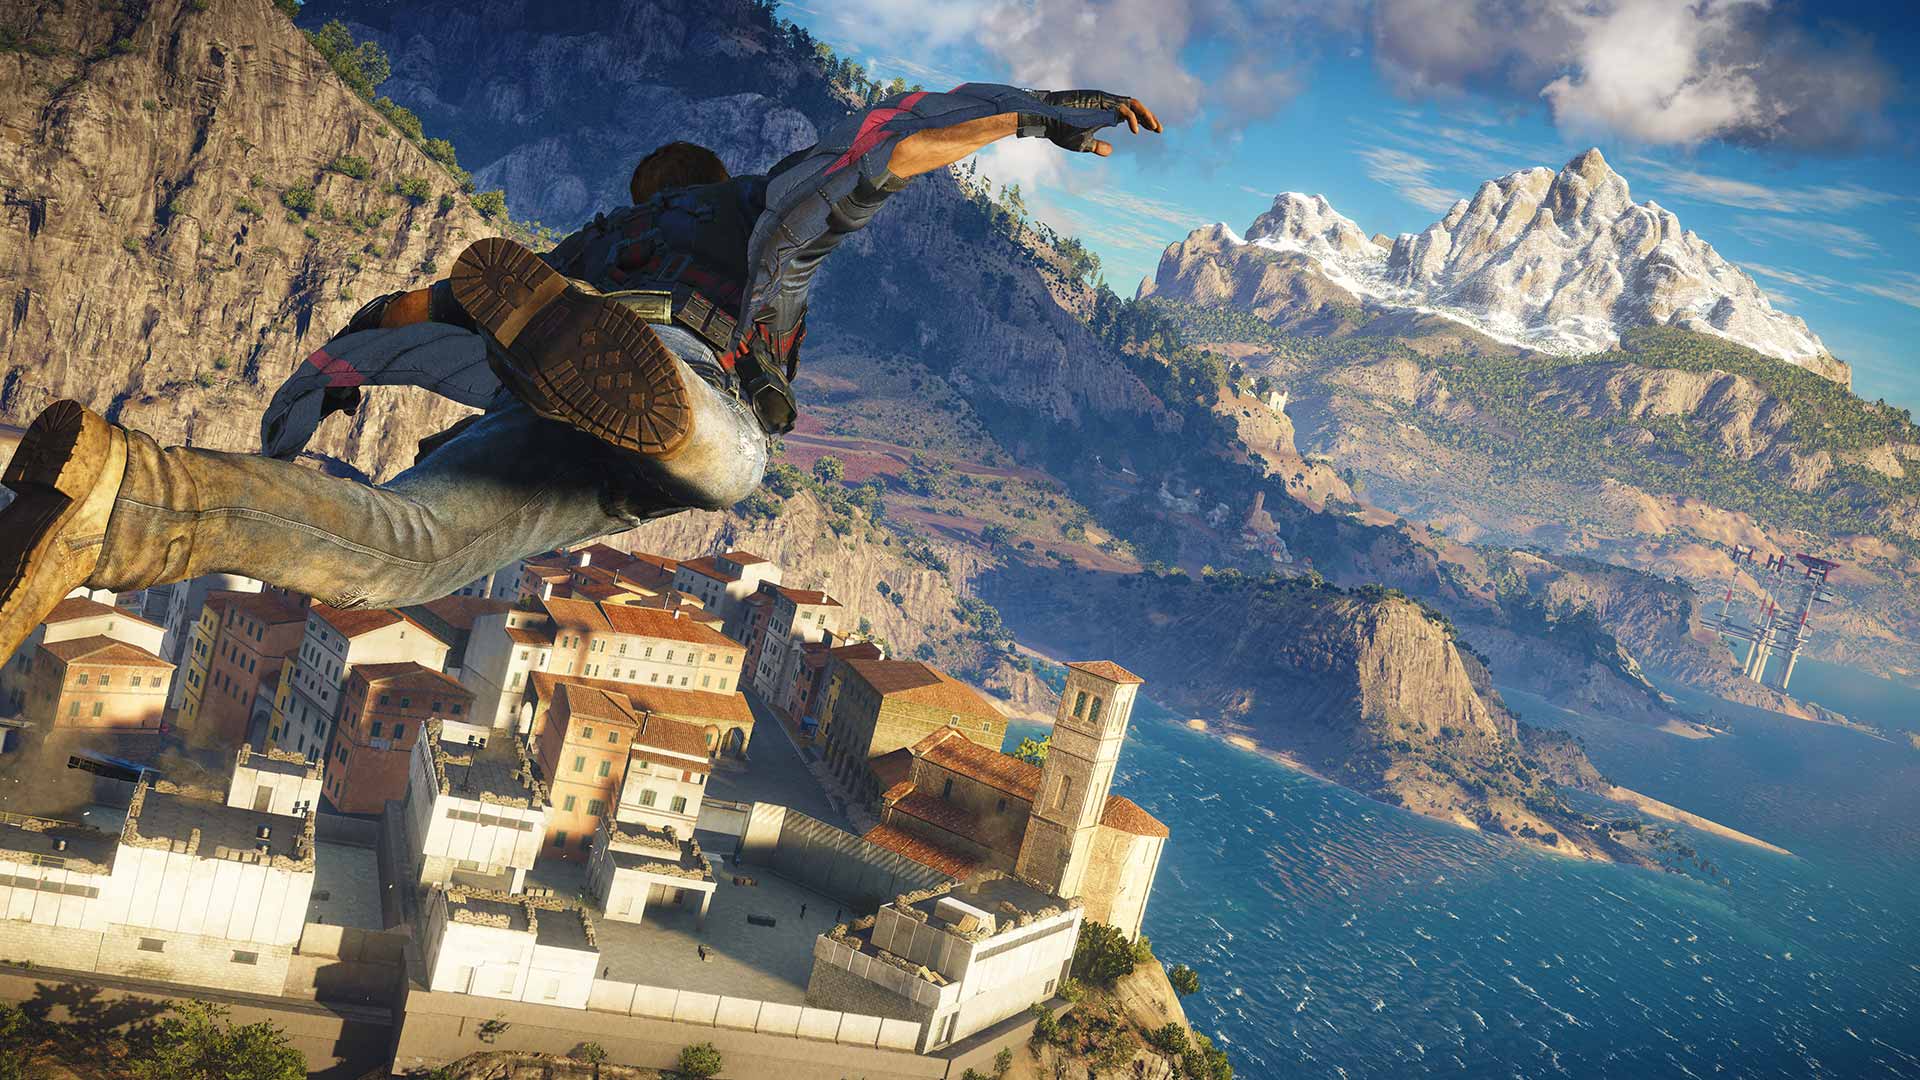 just cause 3 file size